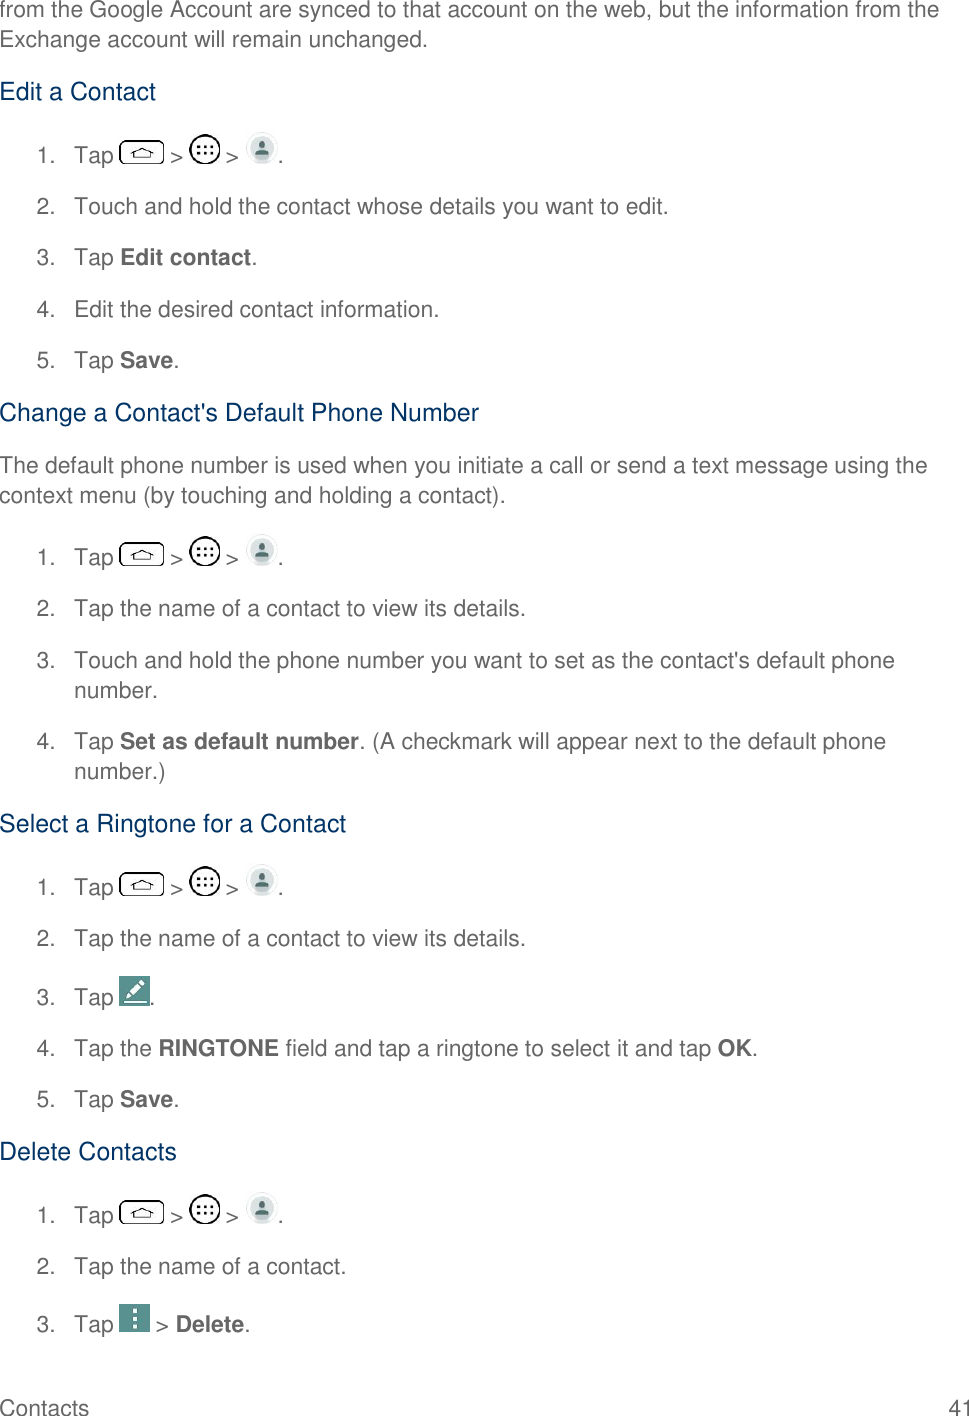 Contacts  41 from the Google Account are synced to that account on the web, but the information from the Exchange account will remain unchanged. Edit a Contact 1.  Tap   &gt;   &gt;  . 2.  Touch and hold the contact whose details you want to edit. 3.  Tap Edit contact. 4.  Edit the desired contact information. 5.  Tap Save. Change a Contact&apos;s Default Phone Number The default phone number is used when you initiate a call or send a text message using the context menu (by touching and holding a contact). 1.  Tap   &gt;   &gt;  . 2.  Tap the name of a contact to view its details. 3.  Touch and hold the phone number you want to set as the contact&apos;s default phone number. 4.  Tap Set as default number. (A checkmark will appear next to the default phone number.) Select a Ringtone for a Contact 1.  Tap   &gt;   &gt;  . 2.  Tap the name of a contact to view its details. 3.  Tap  . 4.  Tap the RINGTONE field and tap a ringtone to select it and tap OK. 5.  Tap Save. Delete Contacts 1.  Tap   &gt;   &gt;  . 2.  Tap the name of a contact. 3.  Tap   &gt; Delete. 